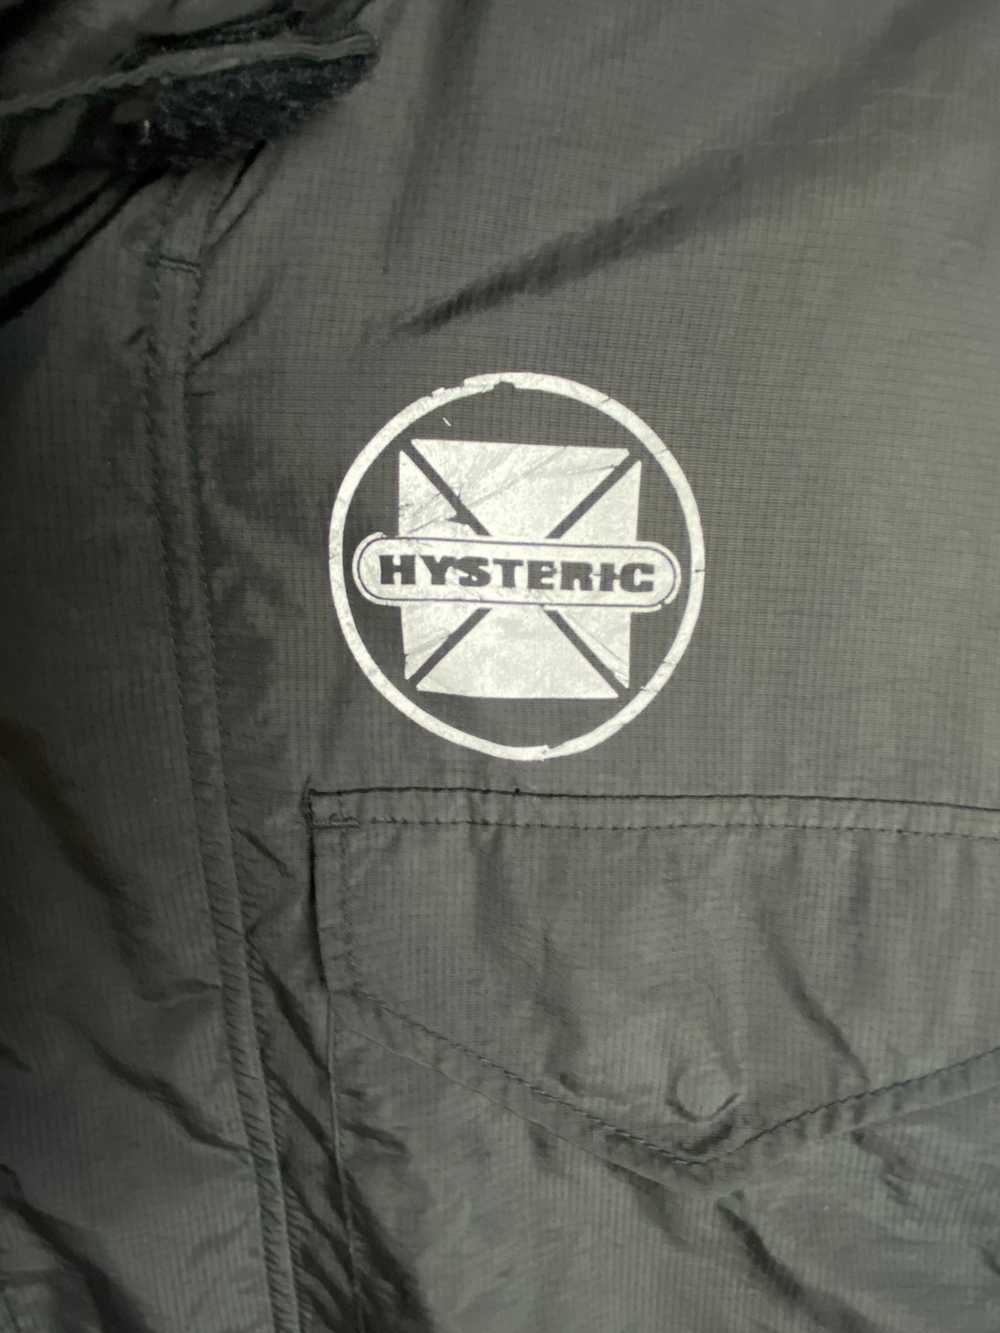 Hysteric Glamour Chaos Bringer M-65 Jacket - image 4